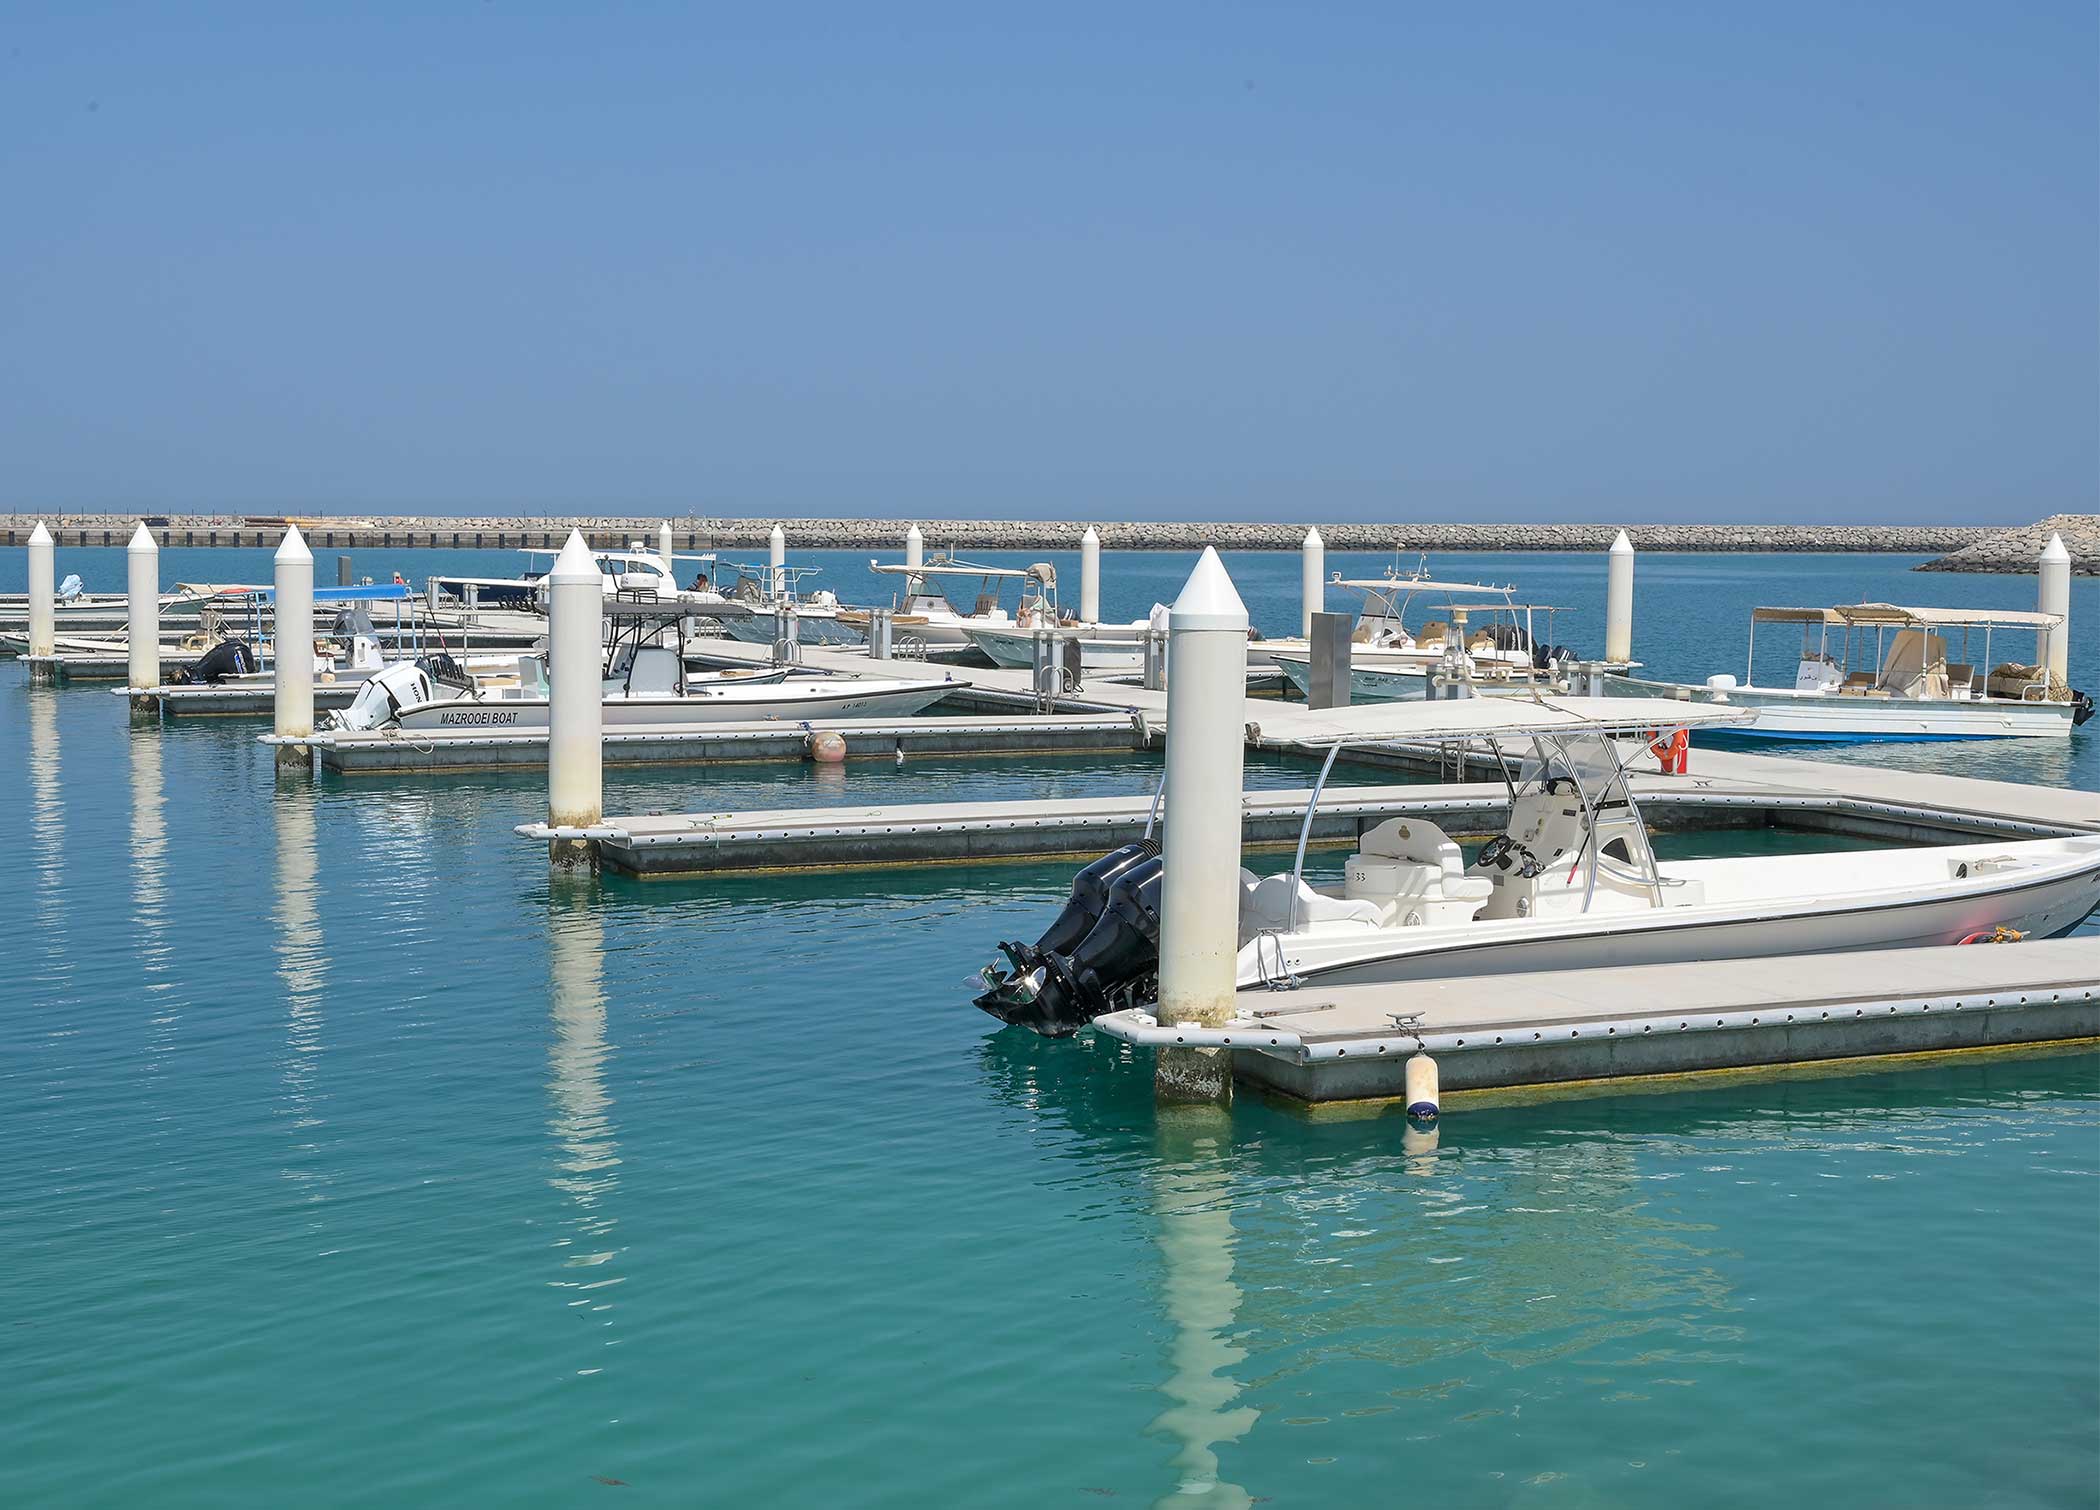 Free Wet Berthing and Dry Parking for UAE Nationals in Al Dhafra Region